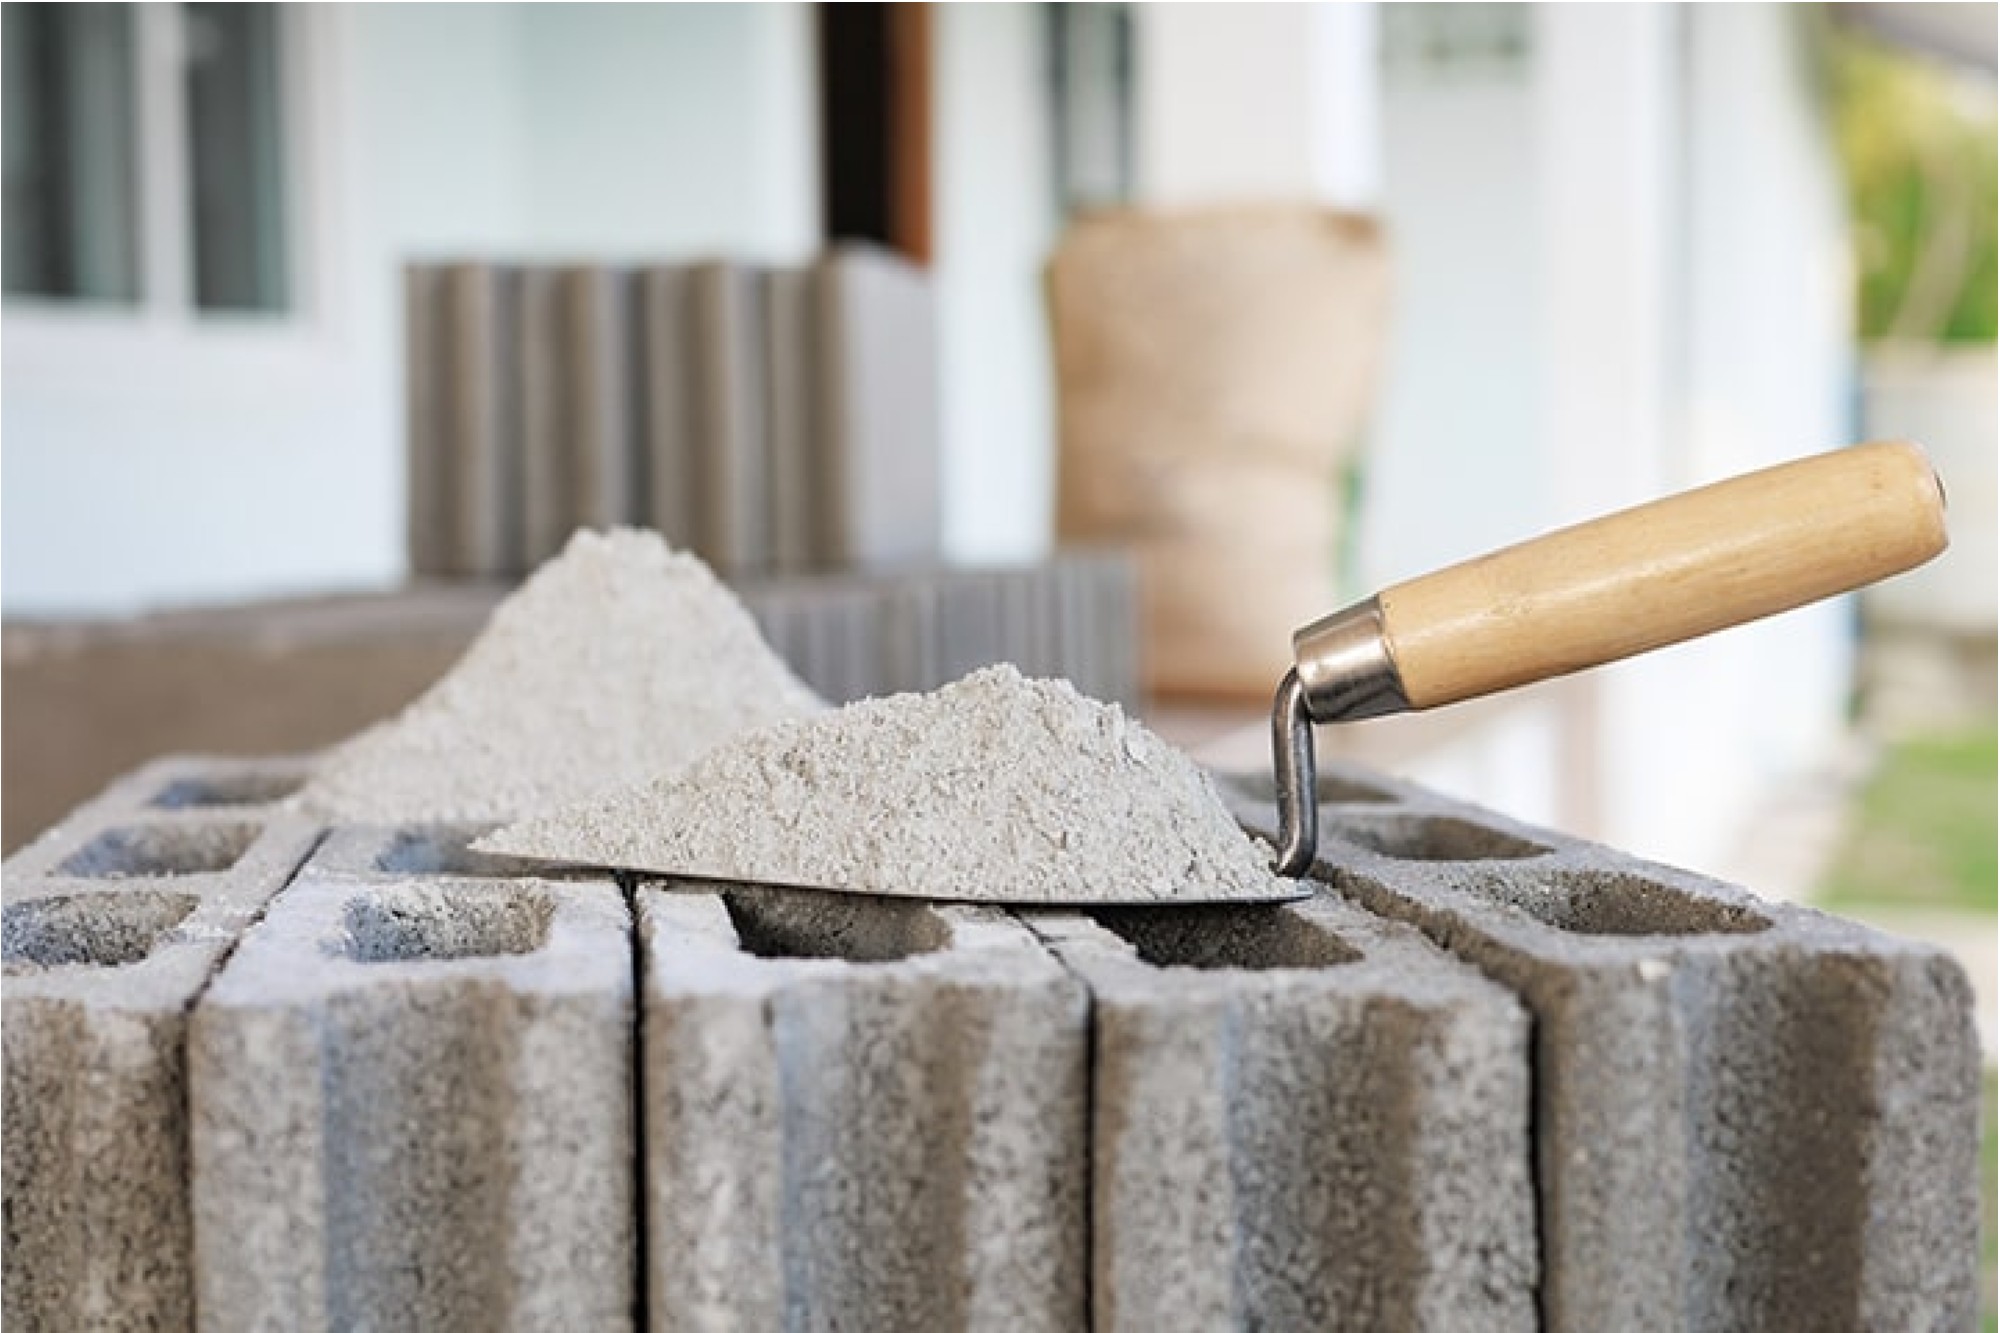 Ambuja Cements acquires Penna Cement